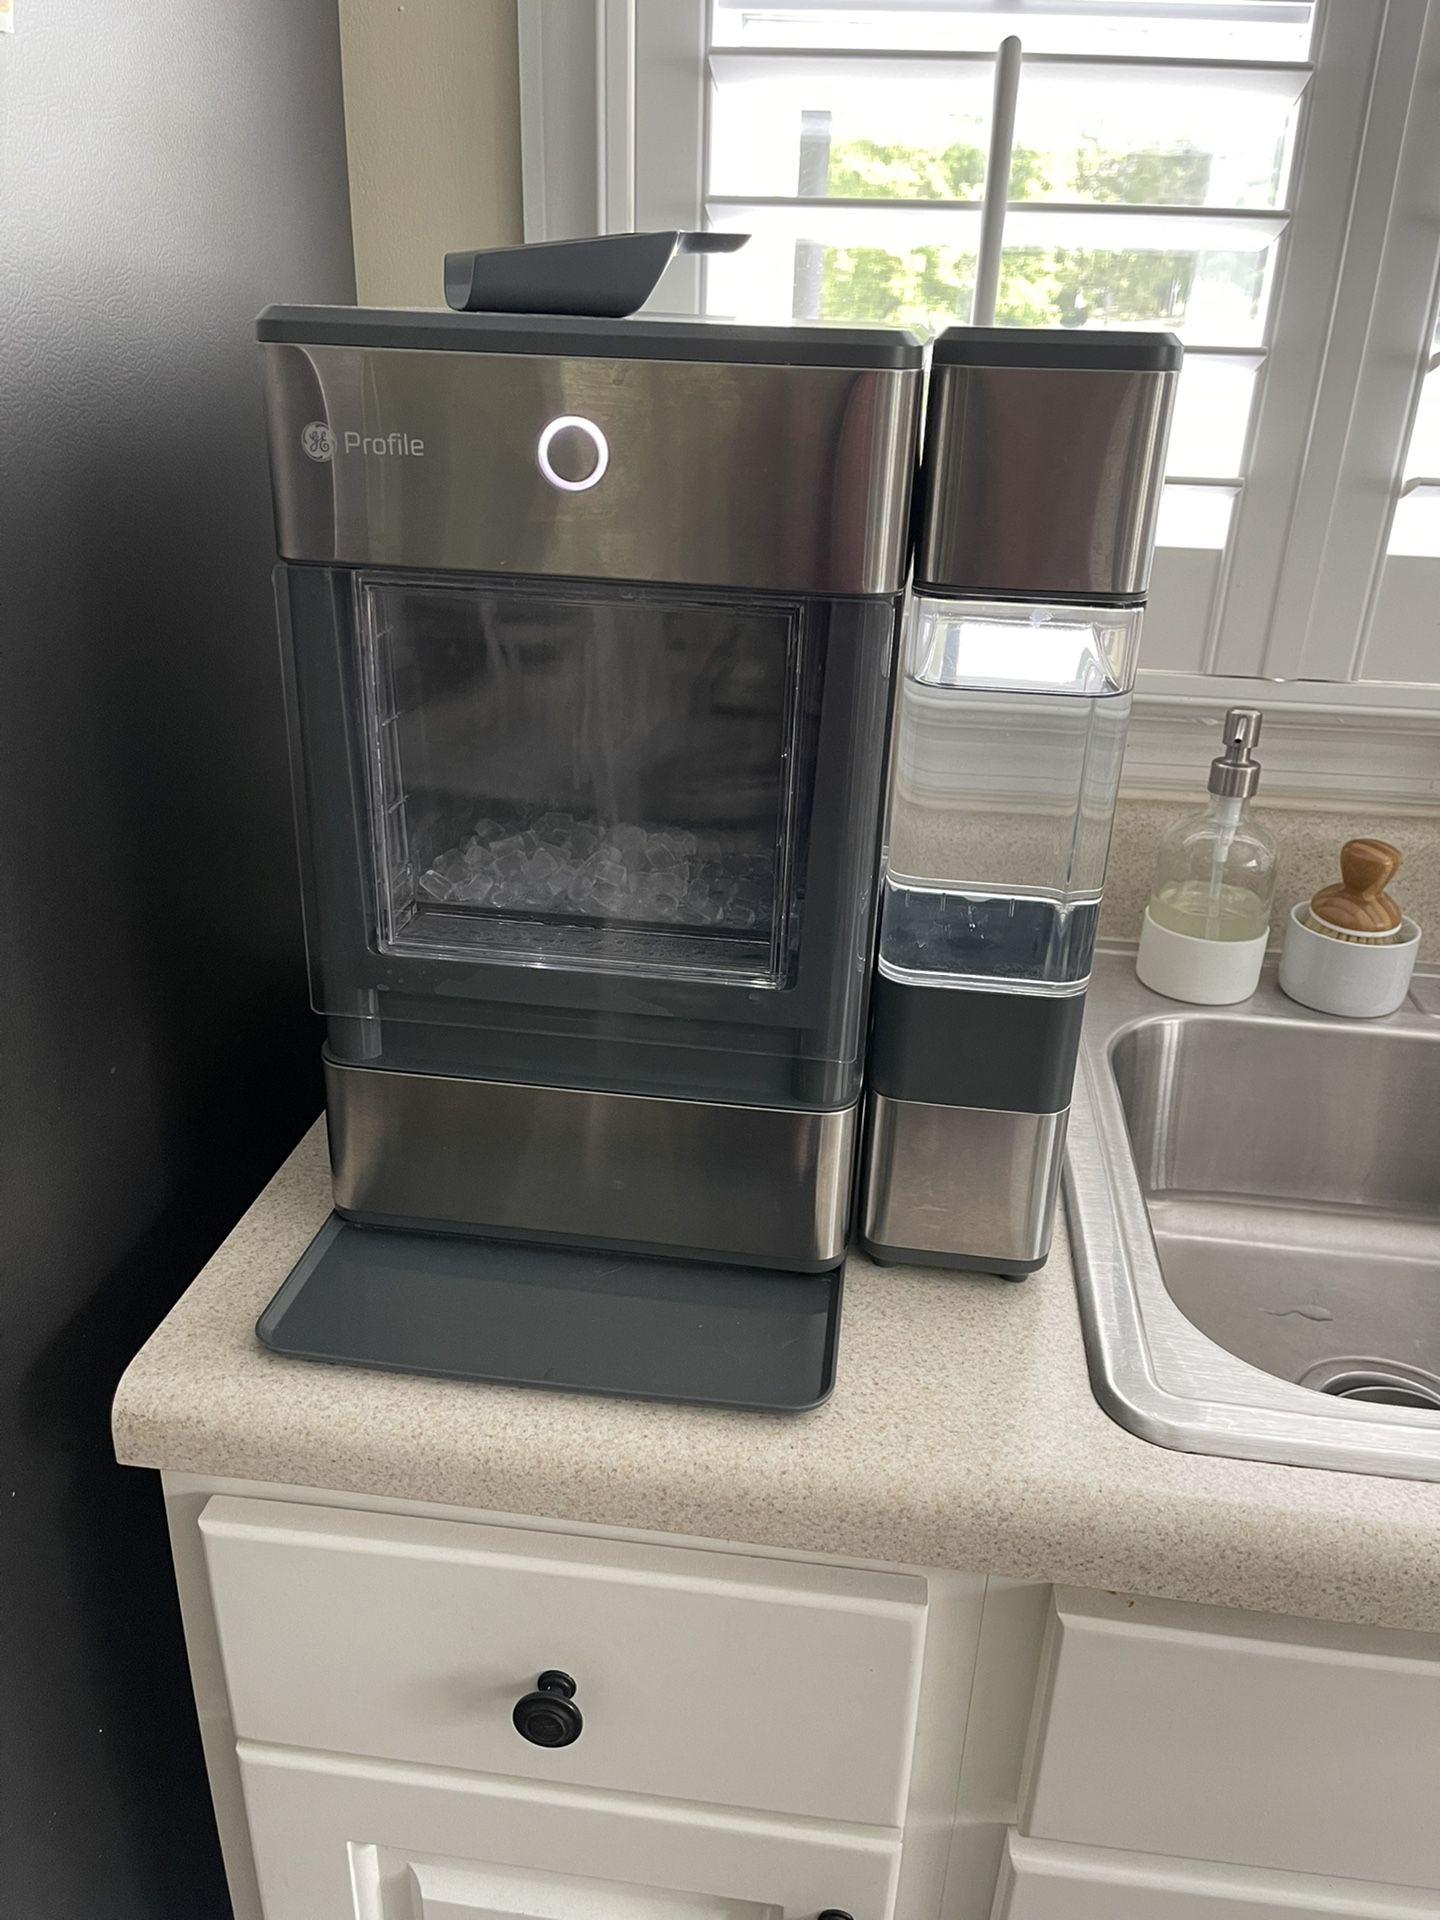 Opal “the Good Ice” Ice Maker